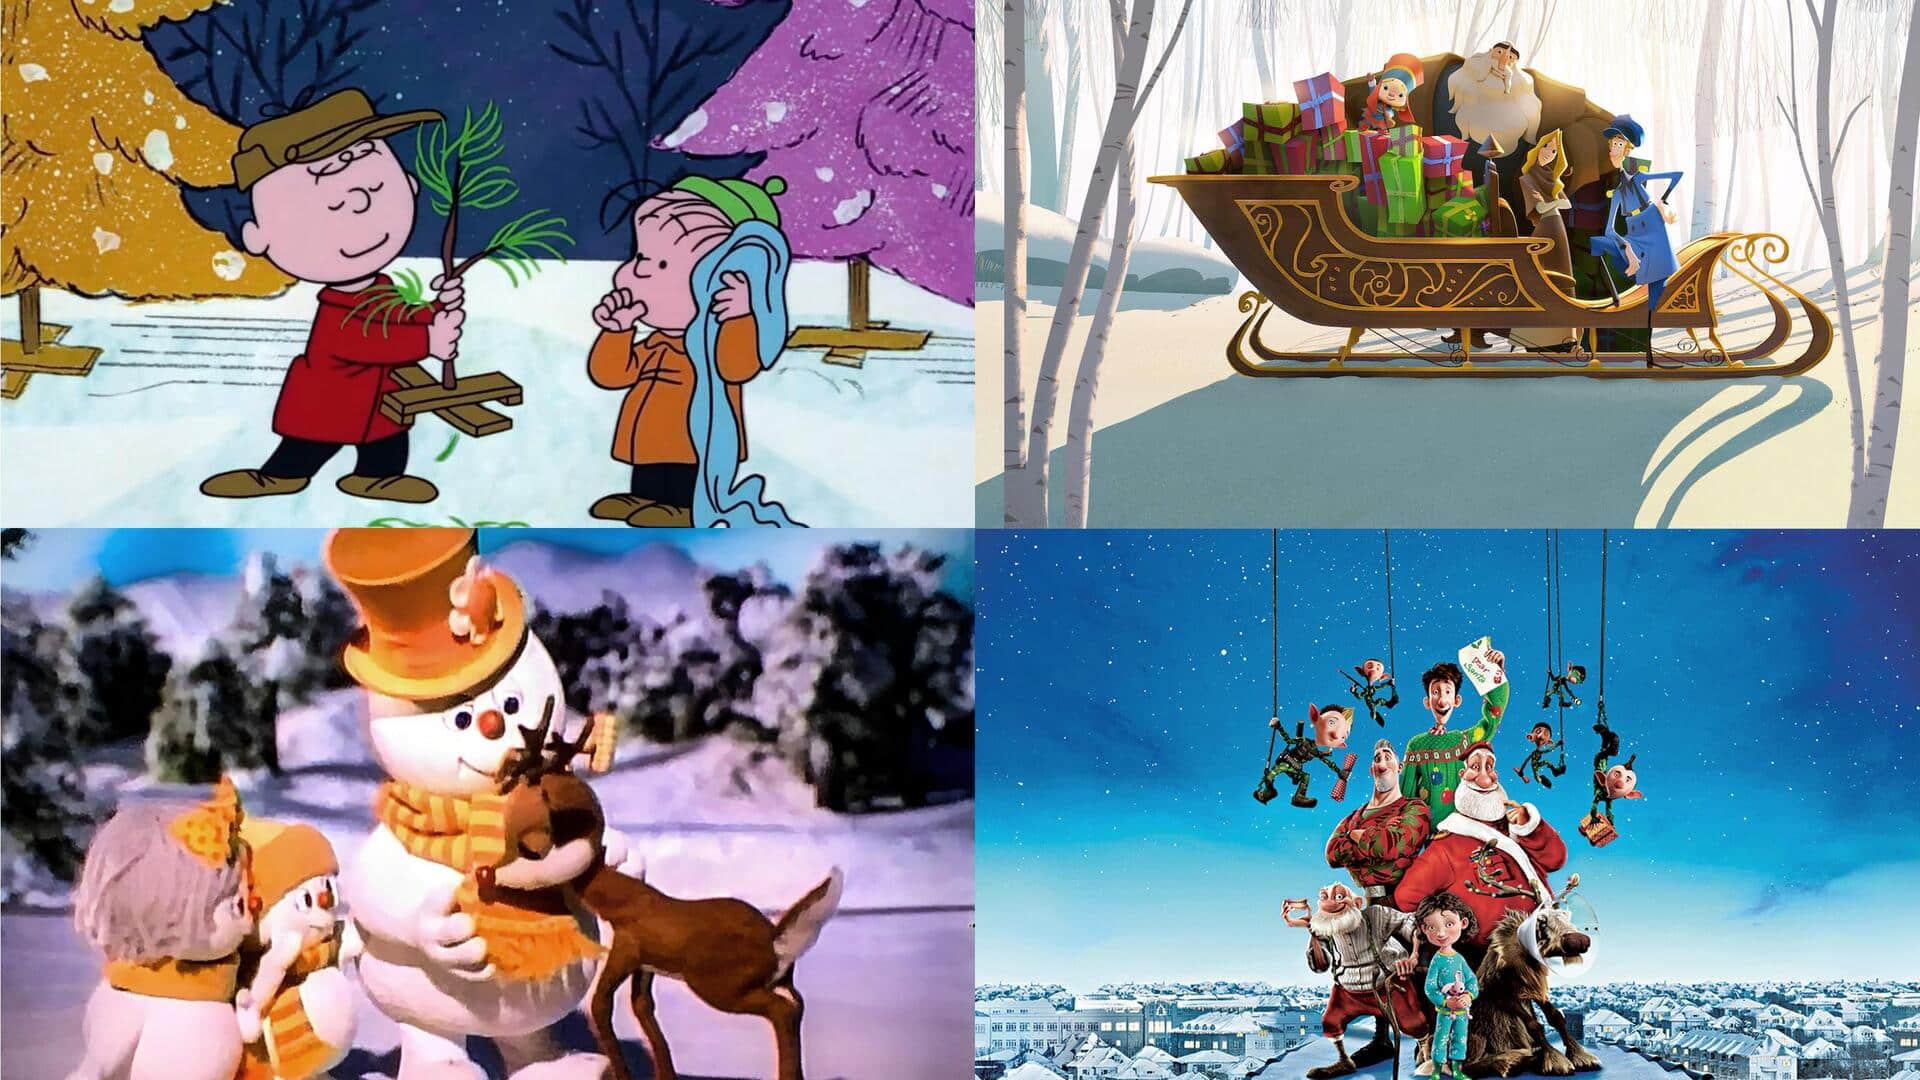 'Klaus' to 'The Polar Express': Best animated Christmas movies